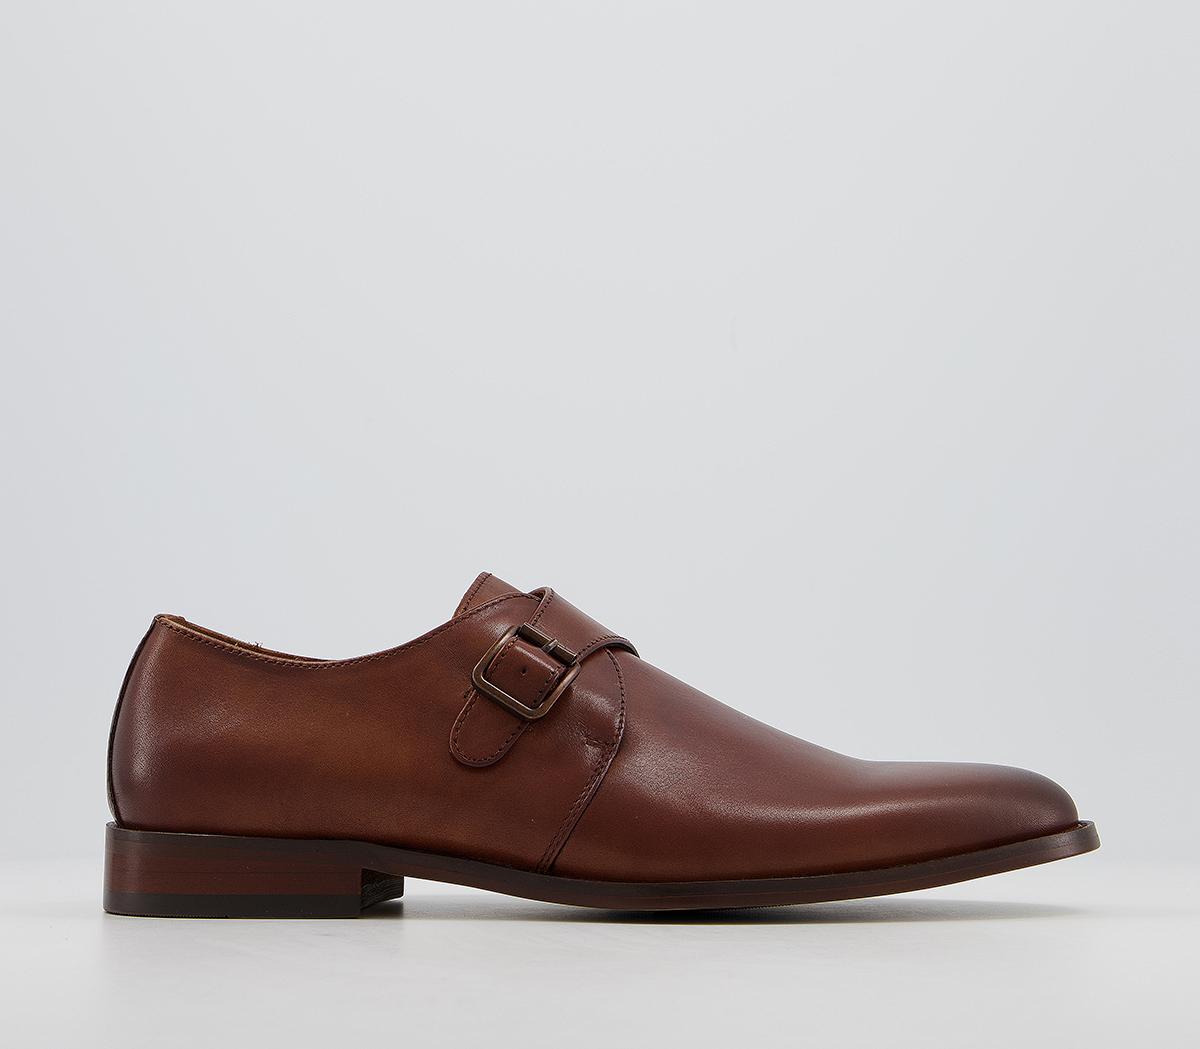 OFFICEMaster Single Strap Monk ShoesTan Leather